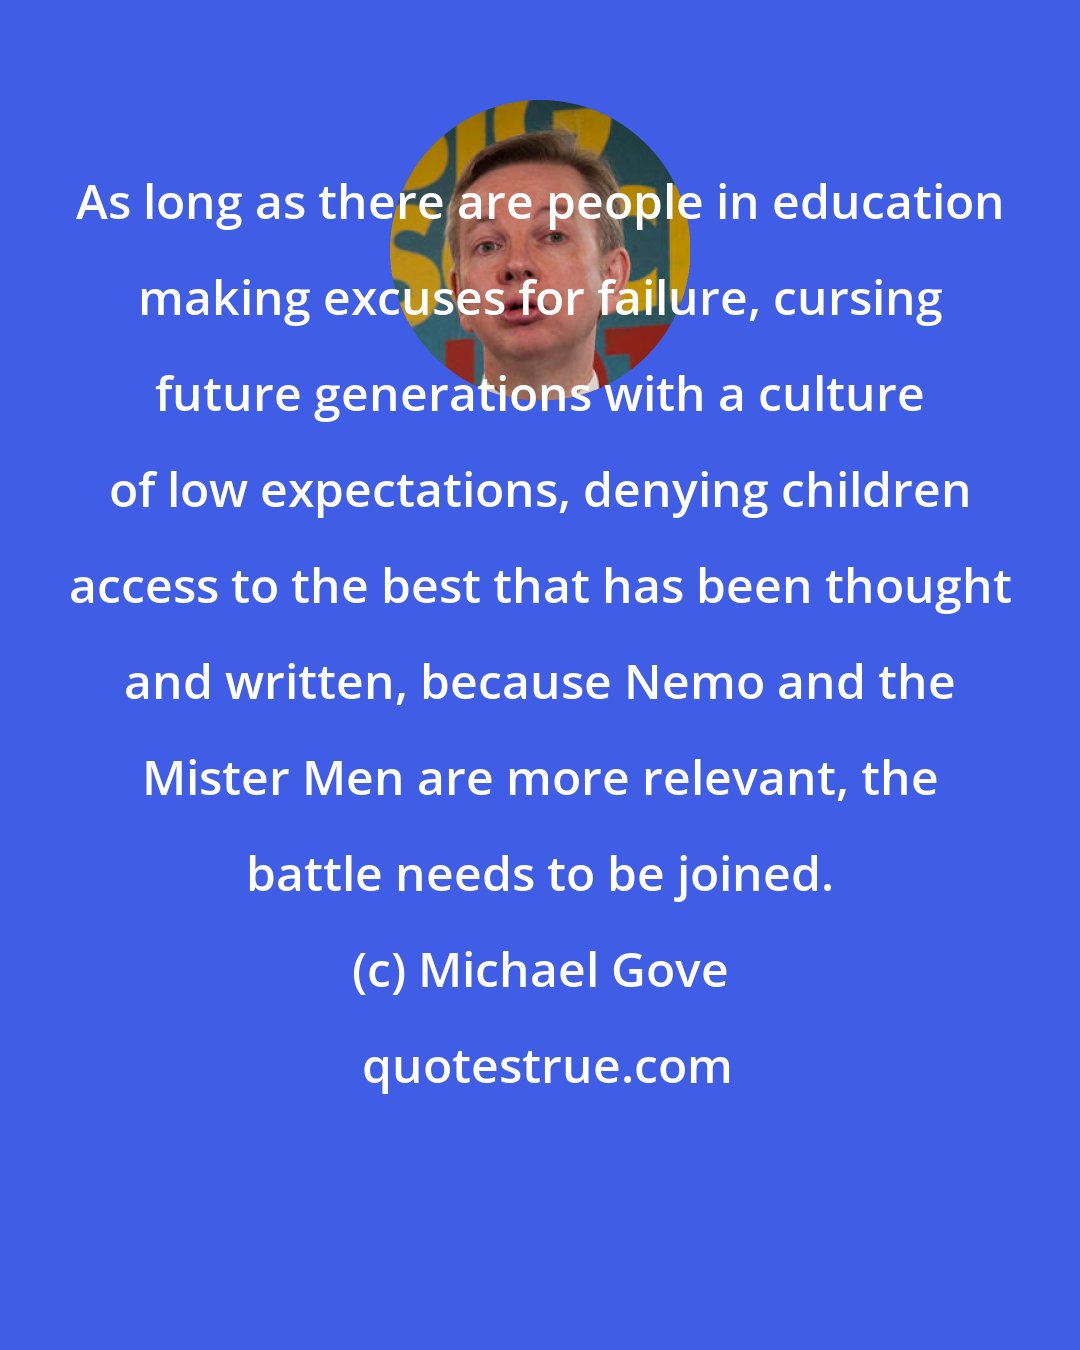 Michael Gove: As long as there are people in education making excuses for failure, cursing future generations with a culture of low expectations, denying children access to the best that has been thought and written, because Nemo and the Mister Men are more relevant, the battle needs to be joined.